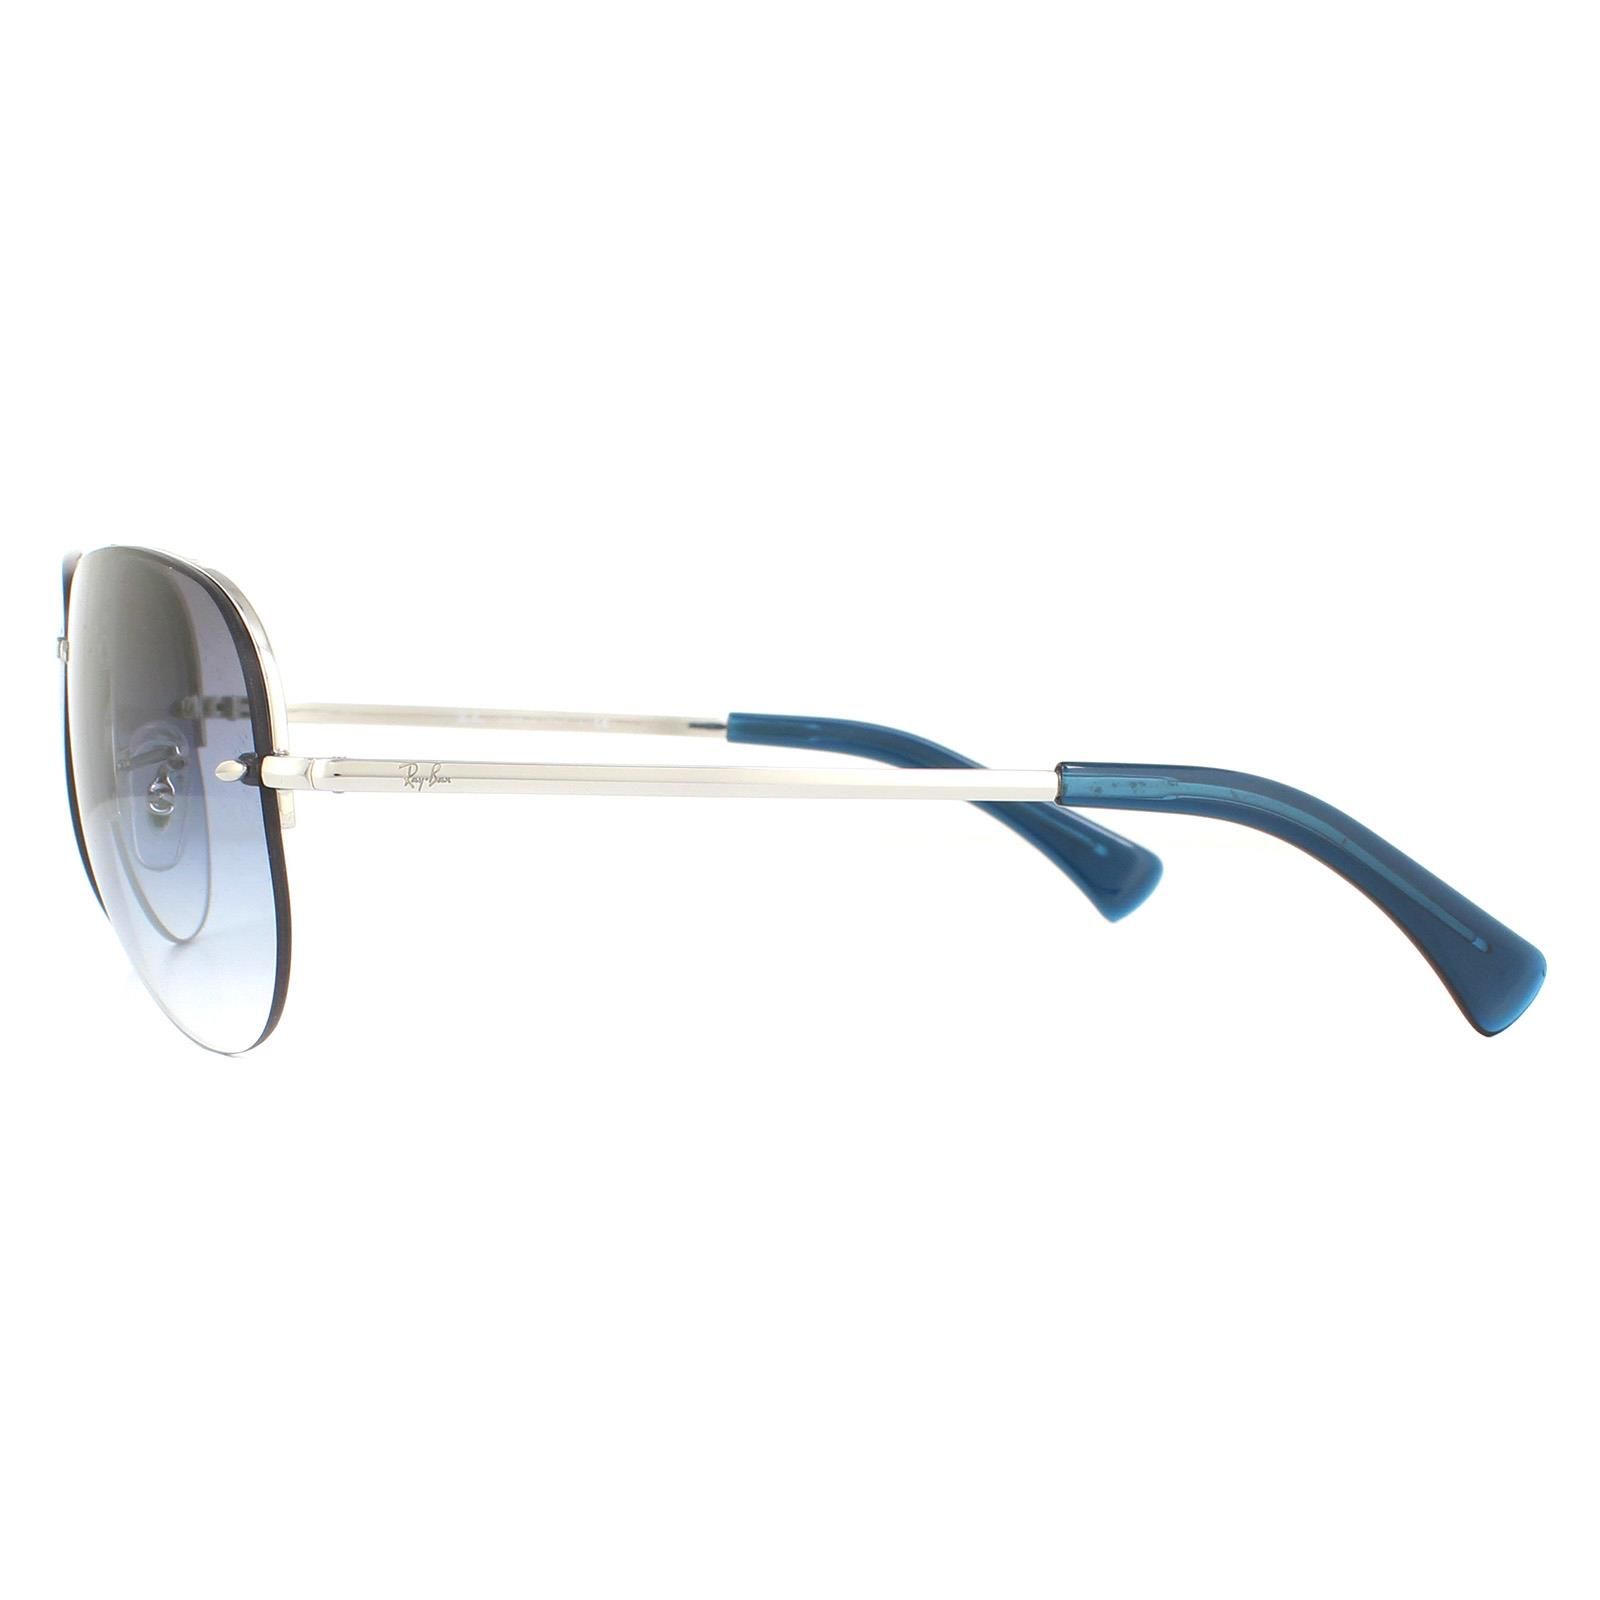 Ray-Ban Sunglasses RB3449 91290S Silver Clear Blue Grey Gradient  are a classic aviator shape but with a rimless lens that give them a modern contemporary twist that is quite brilliant